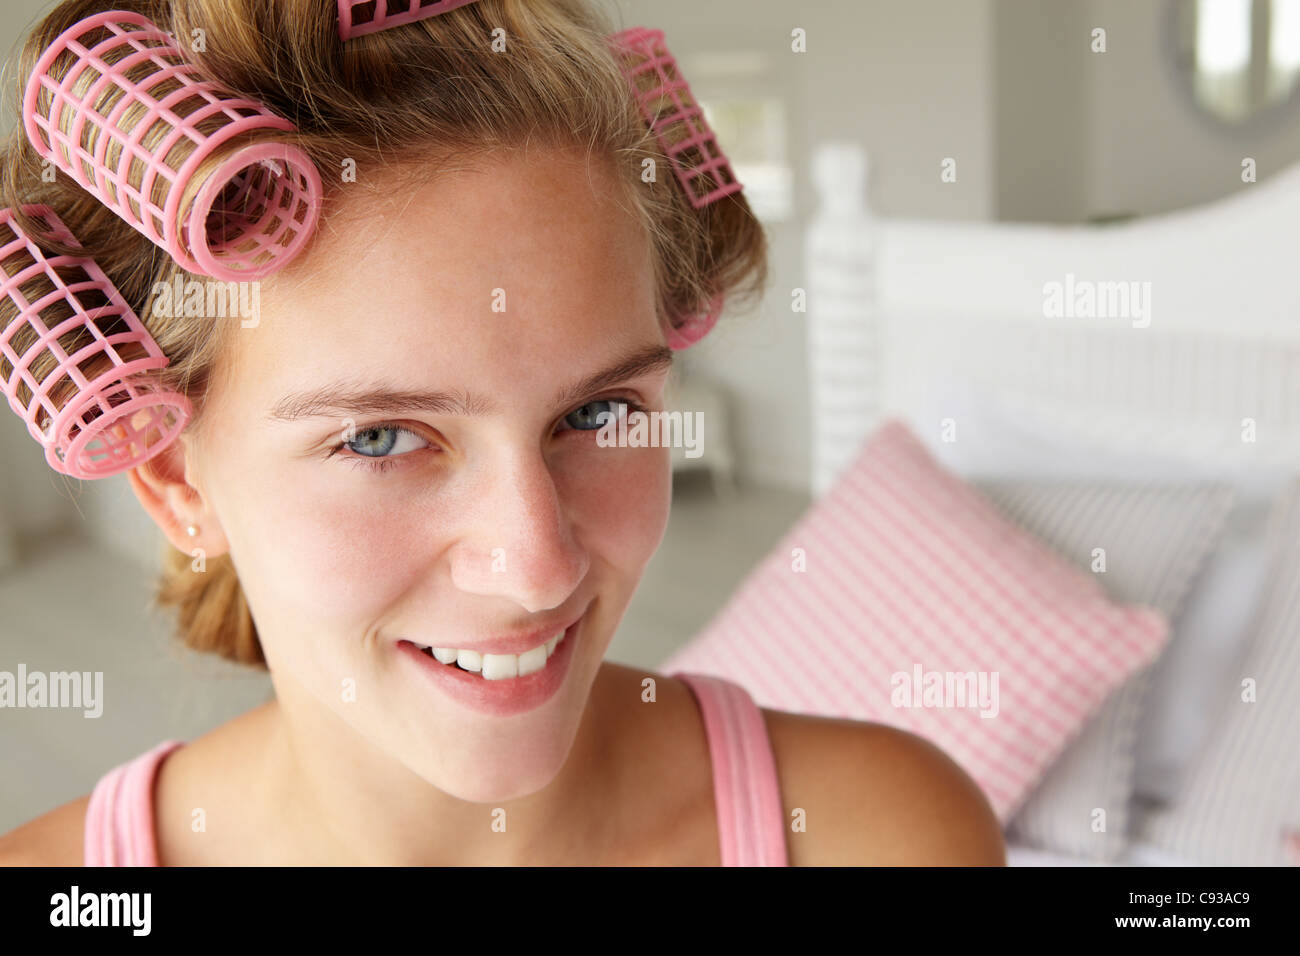 Teenage girl with hair in curlers Stock Photo